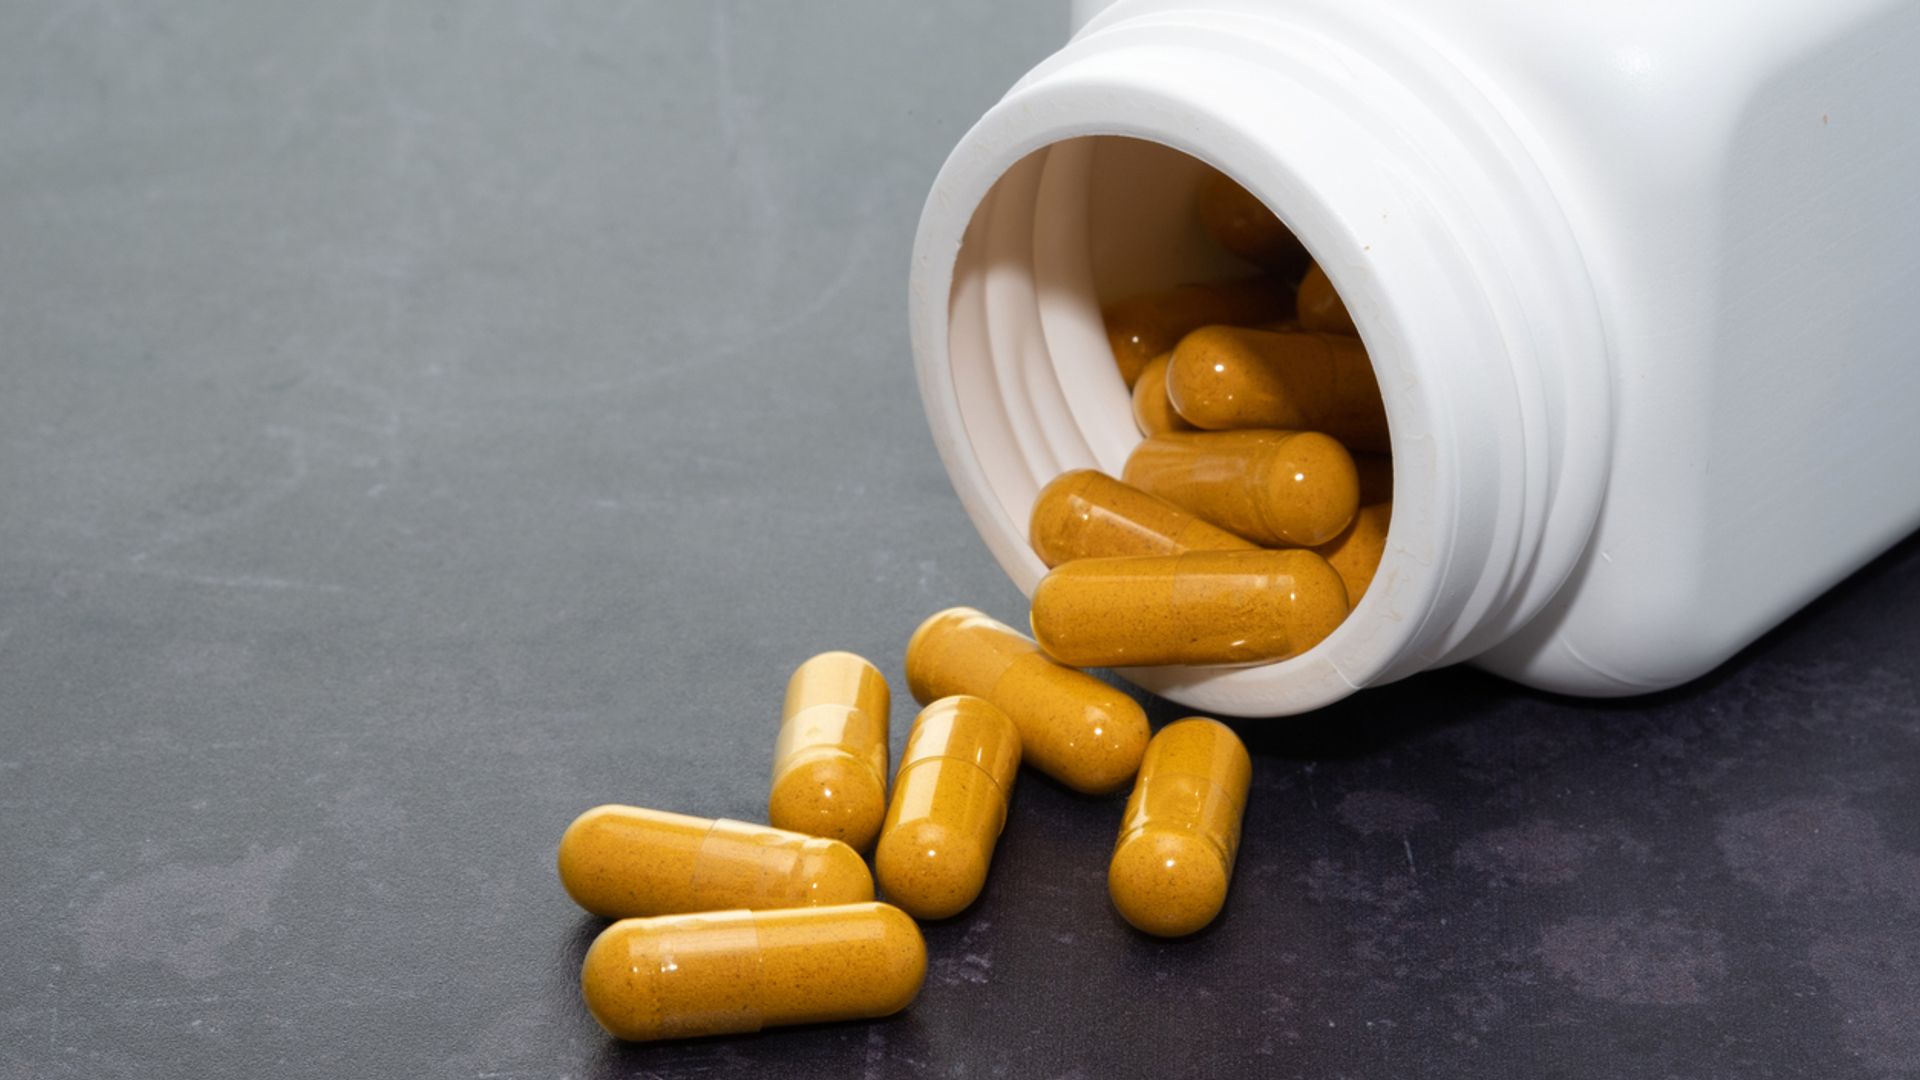 Adverts for supplements claiming to treat autism banned